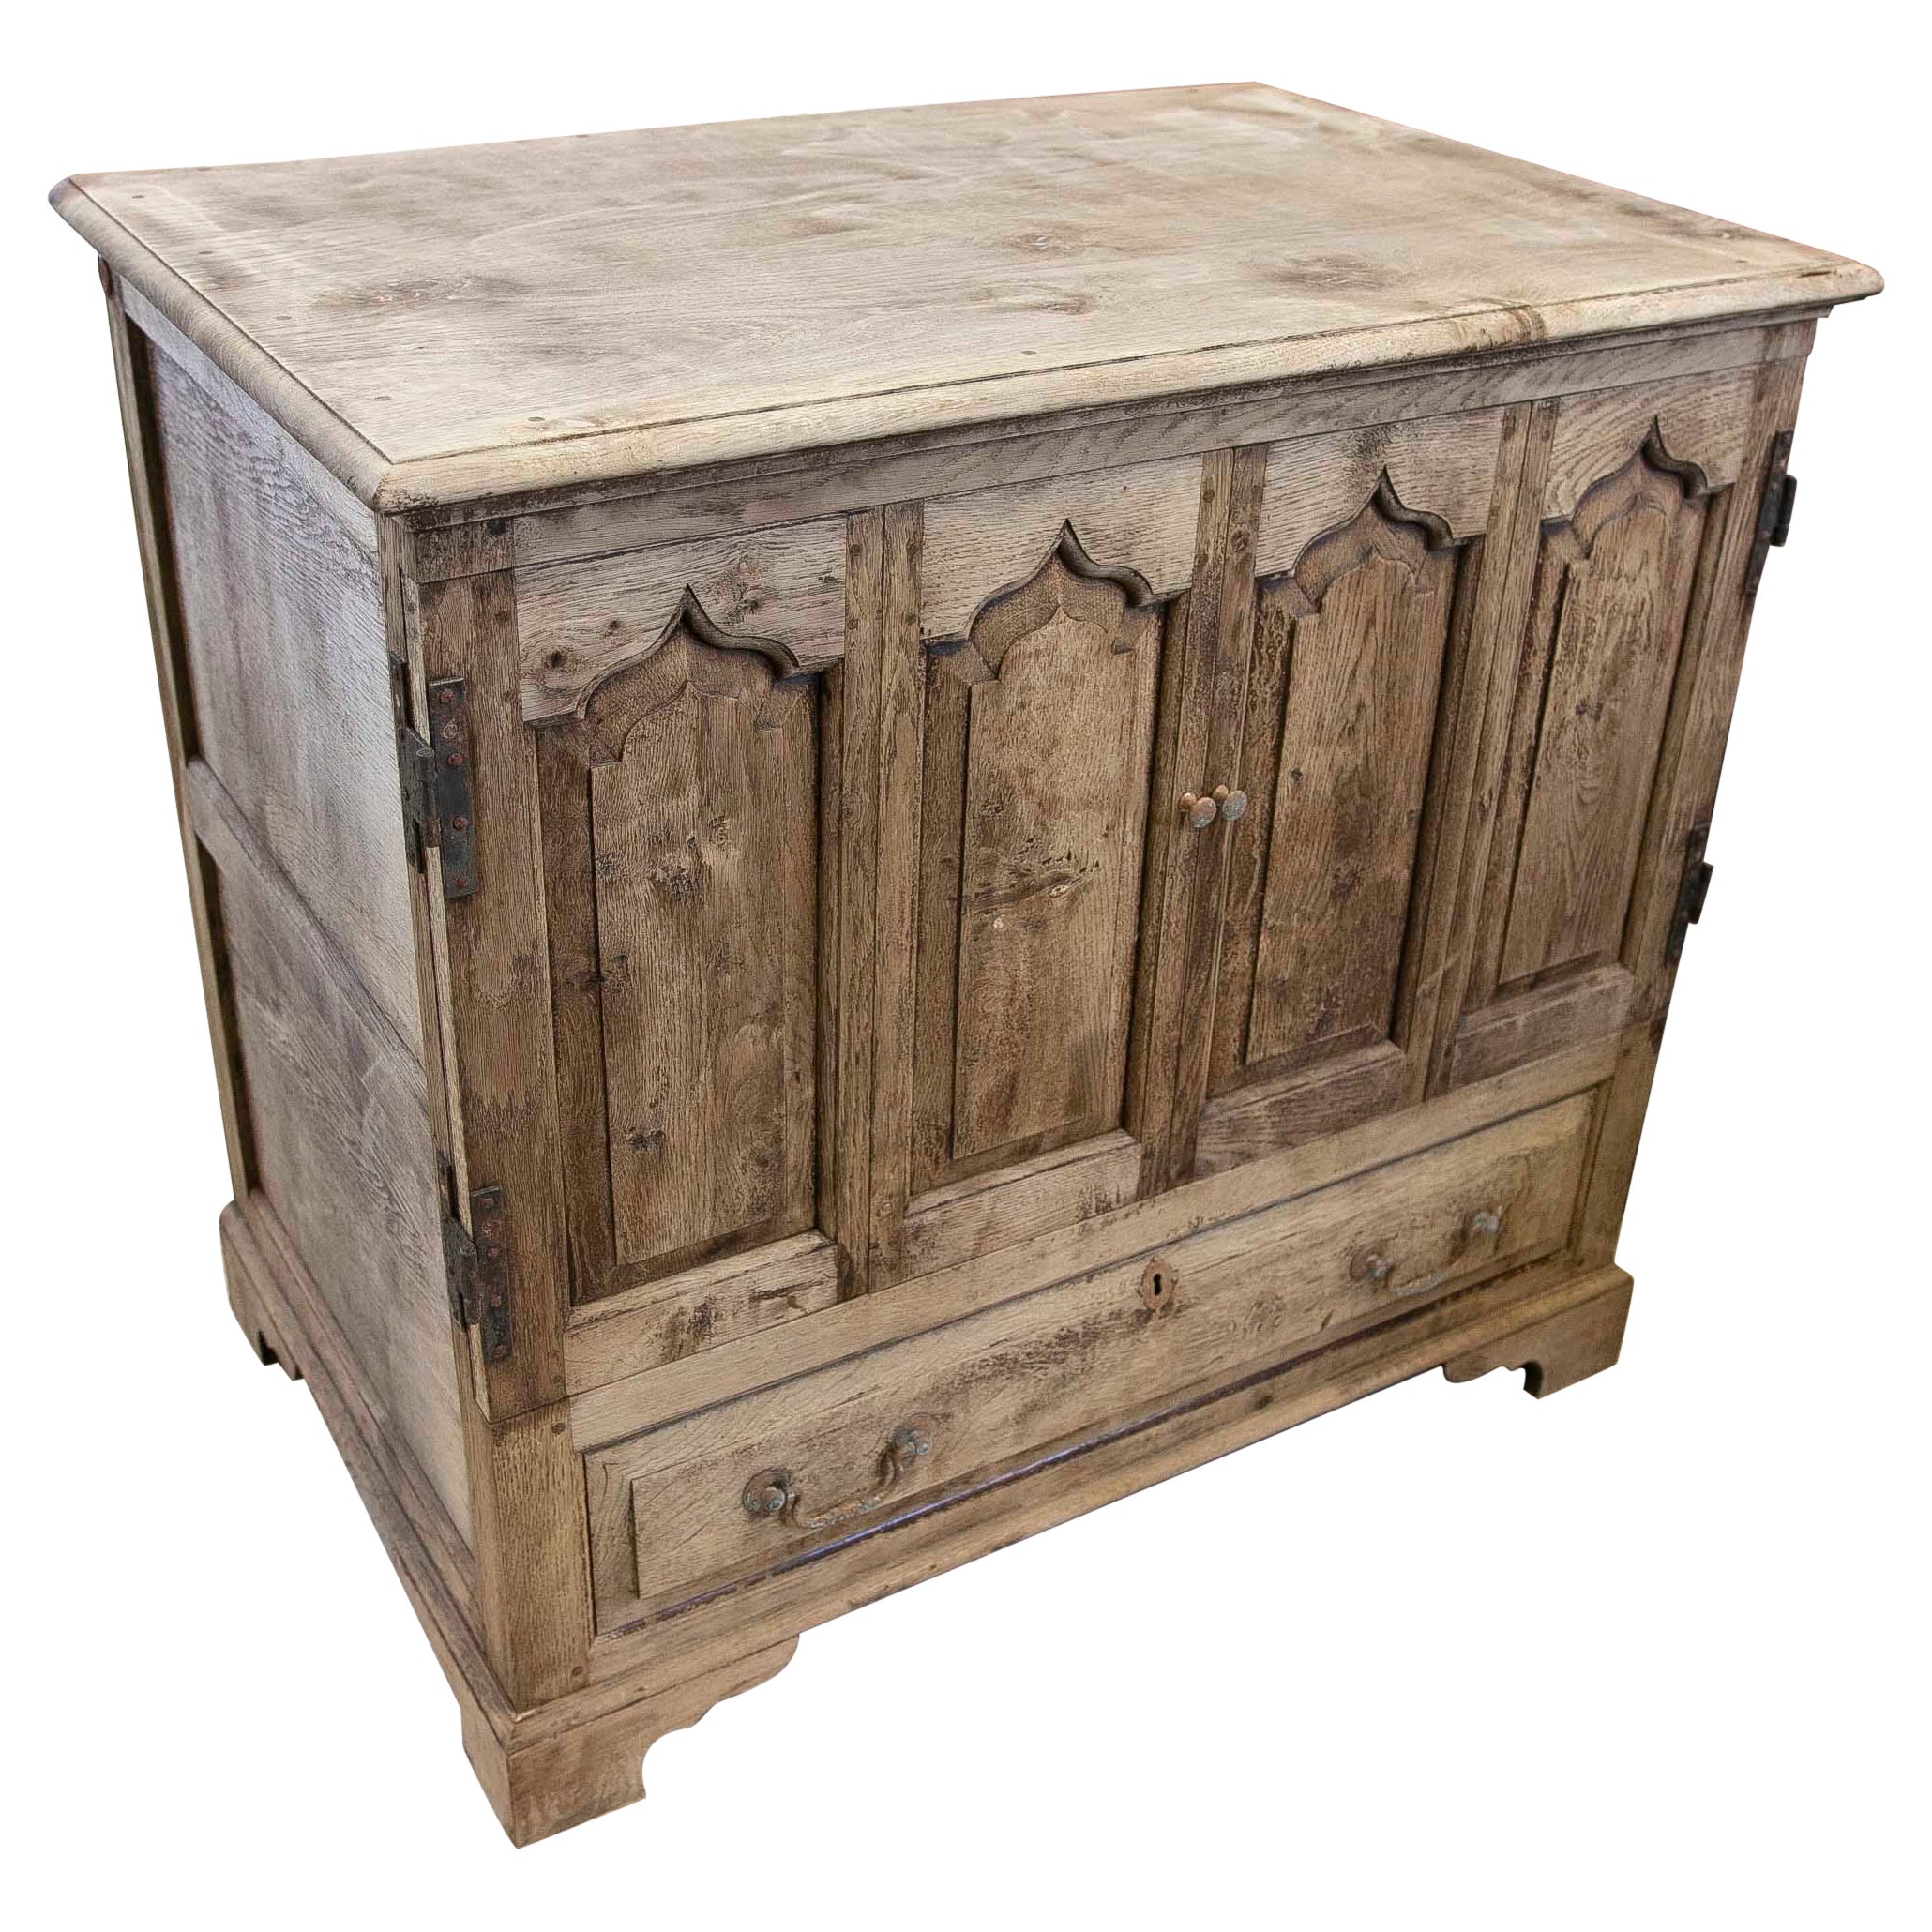 19th Century English Furniture with Doors and Drawer in the Tone of its Wood For Sale